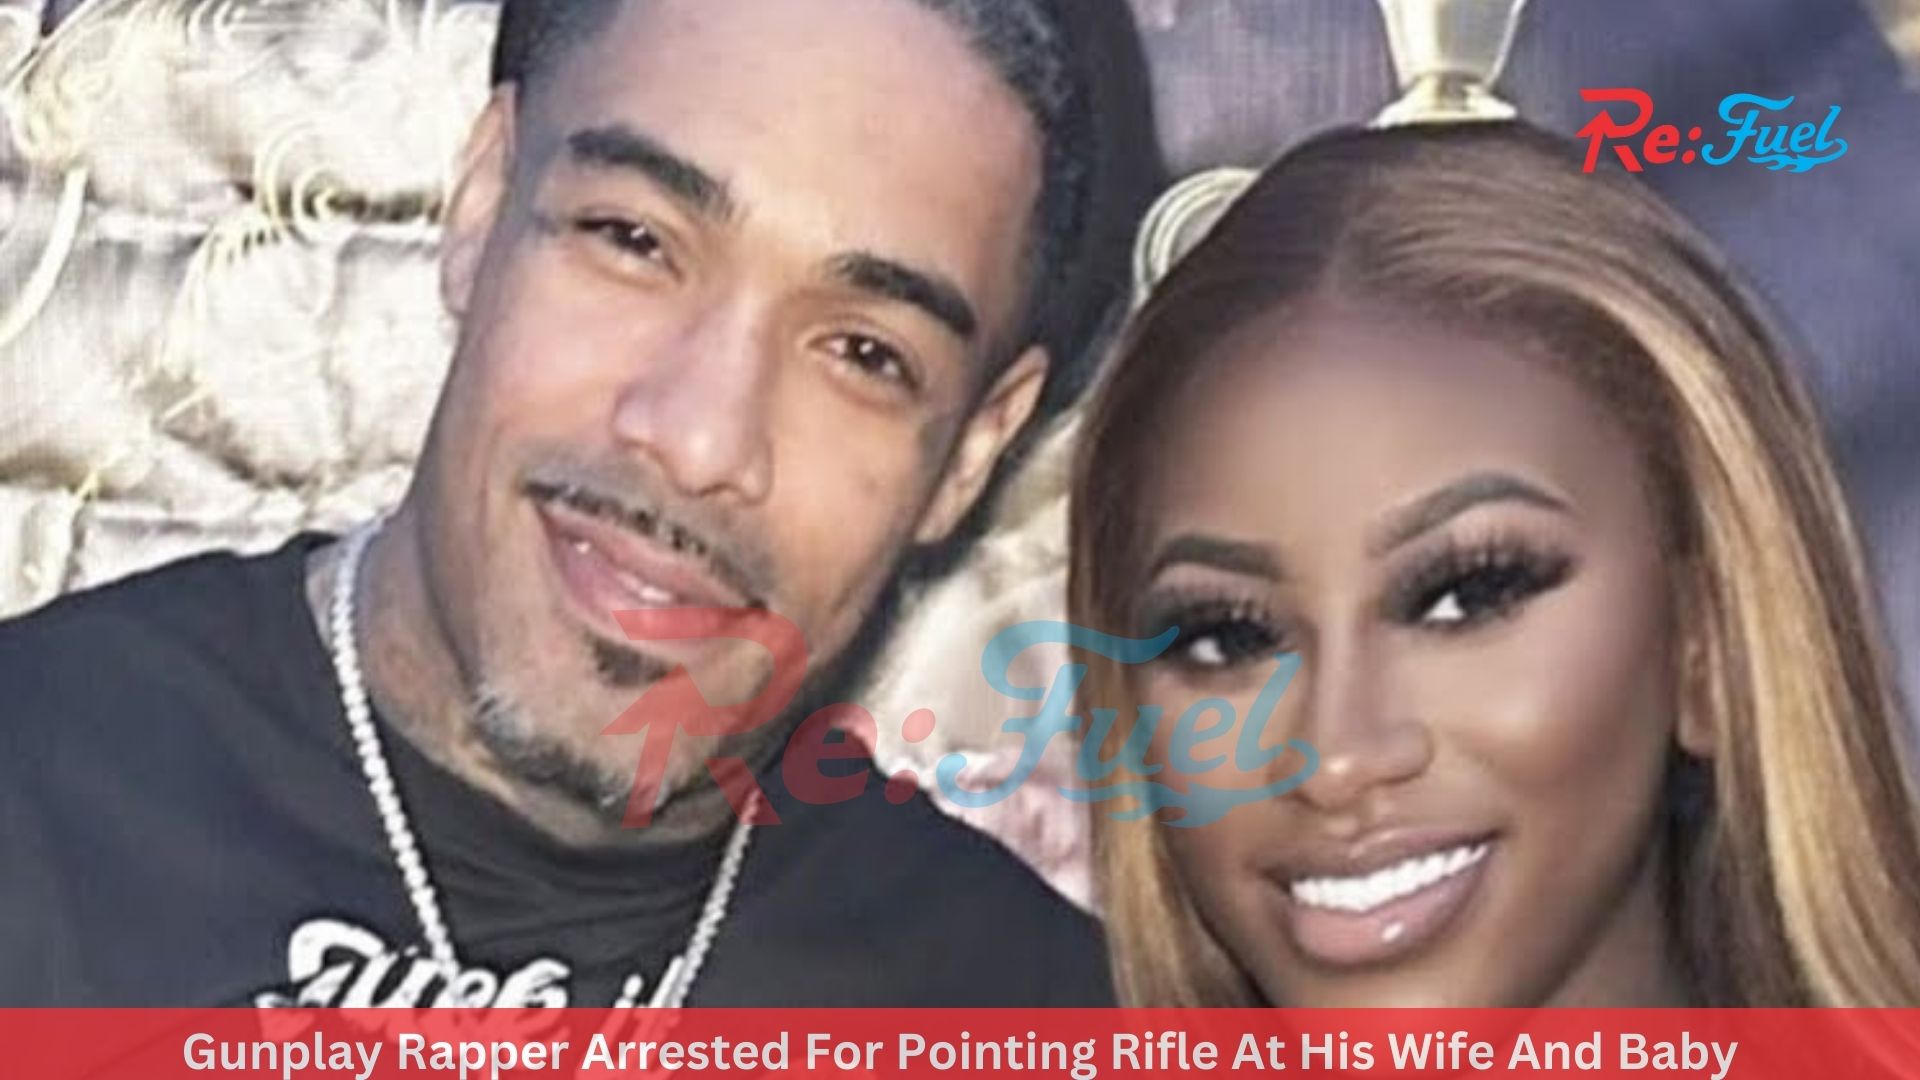 Gunplay Rapper Arrested For Pointing Rifle At His Wife And Baby